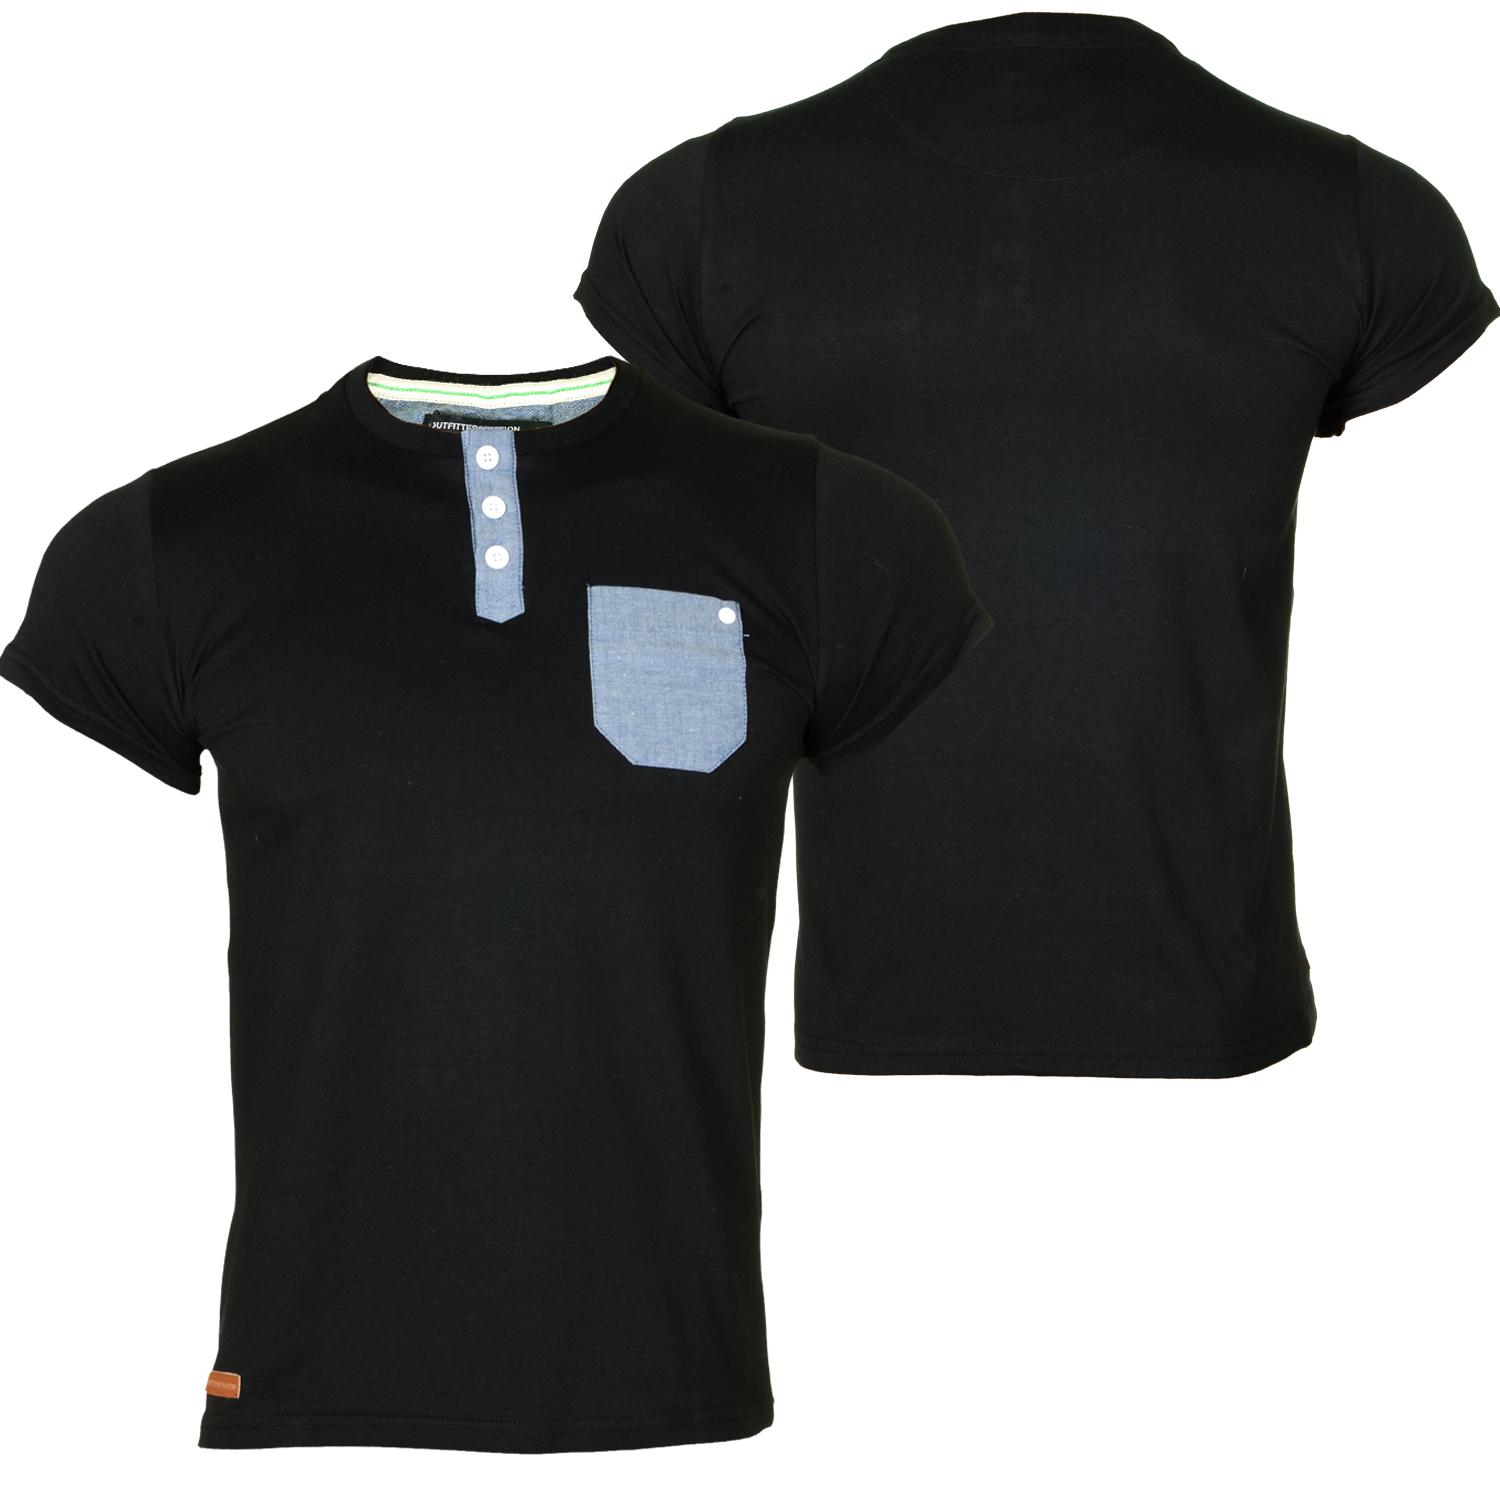 Foto Outfitters Nation Ardon Hombres T-shirt Negro foto 342892